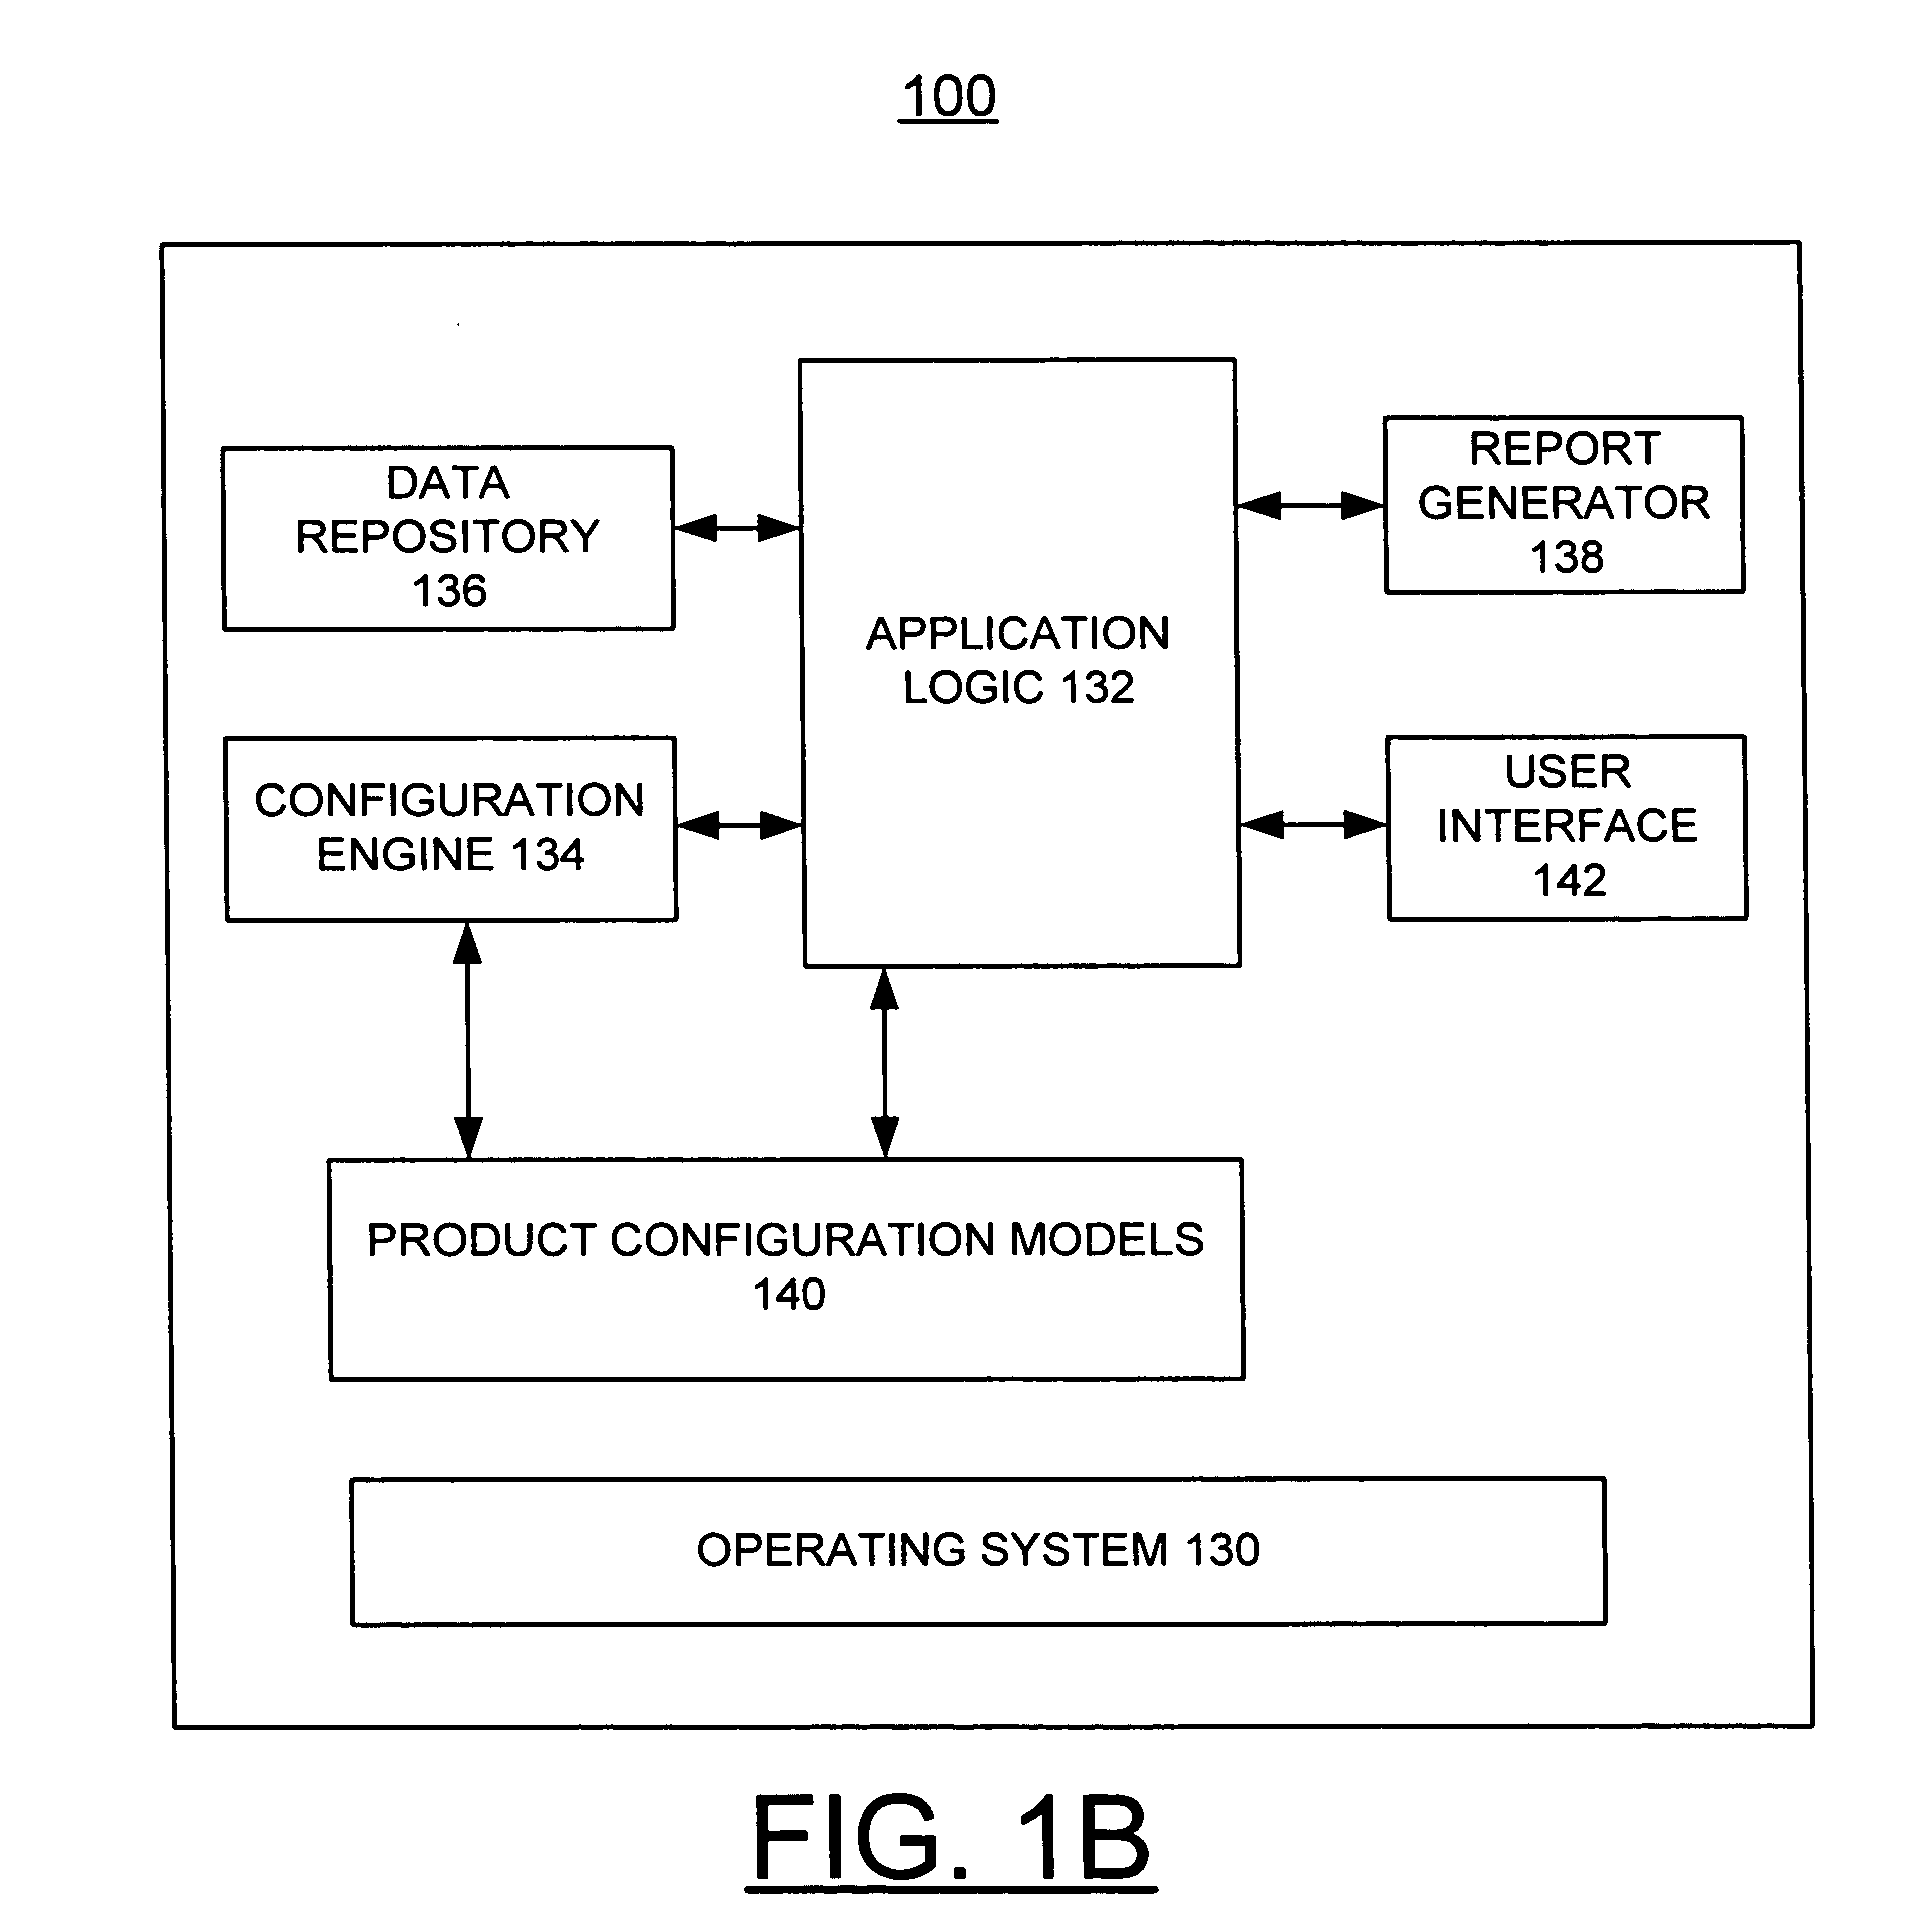 Method and apparatus for implementing persistence and refreshing of validation error messages based upon hierarchical refresh levels